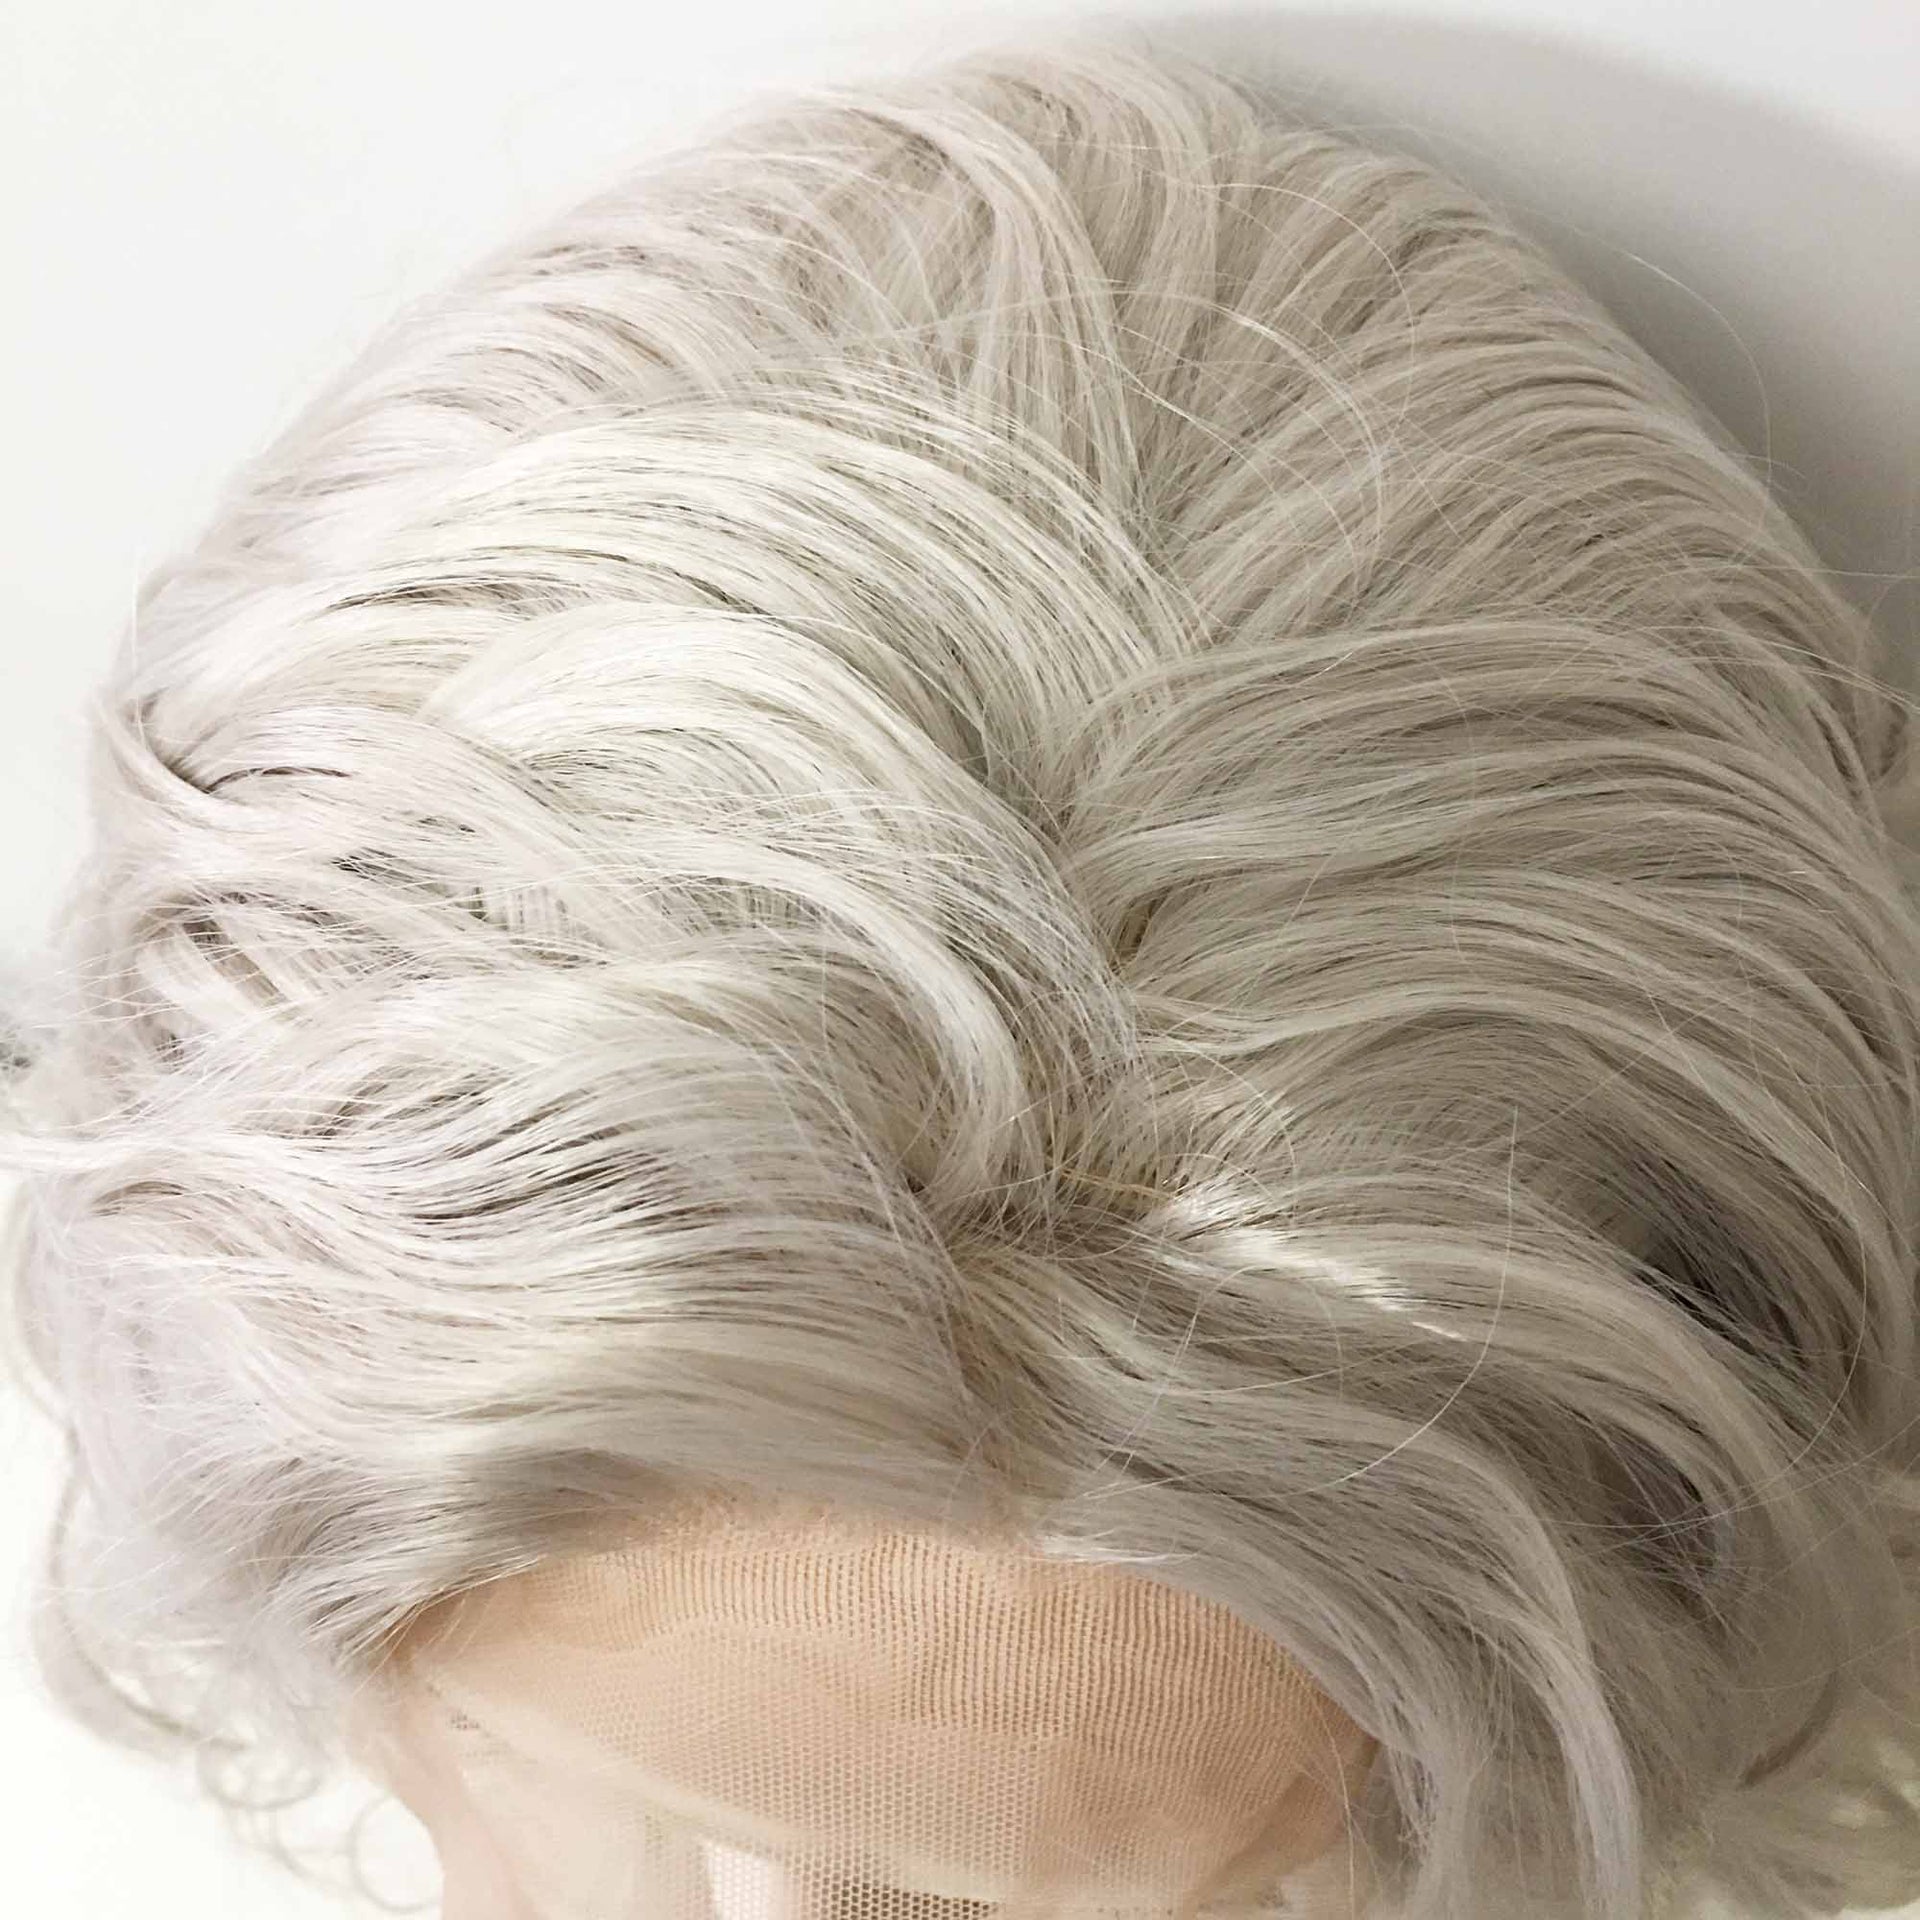 nevermindyrhead Women Gray Lace Front Medium Length Curly Fluffy Side Part Wig